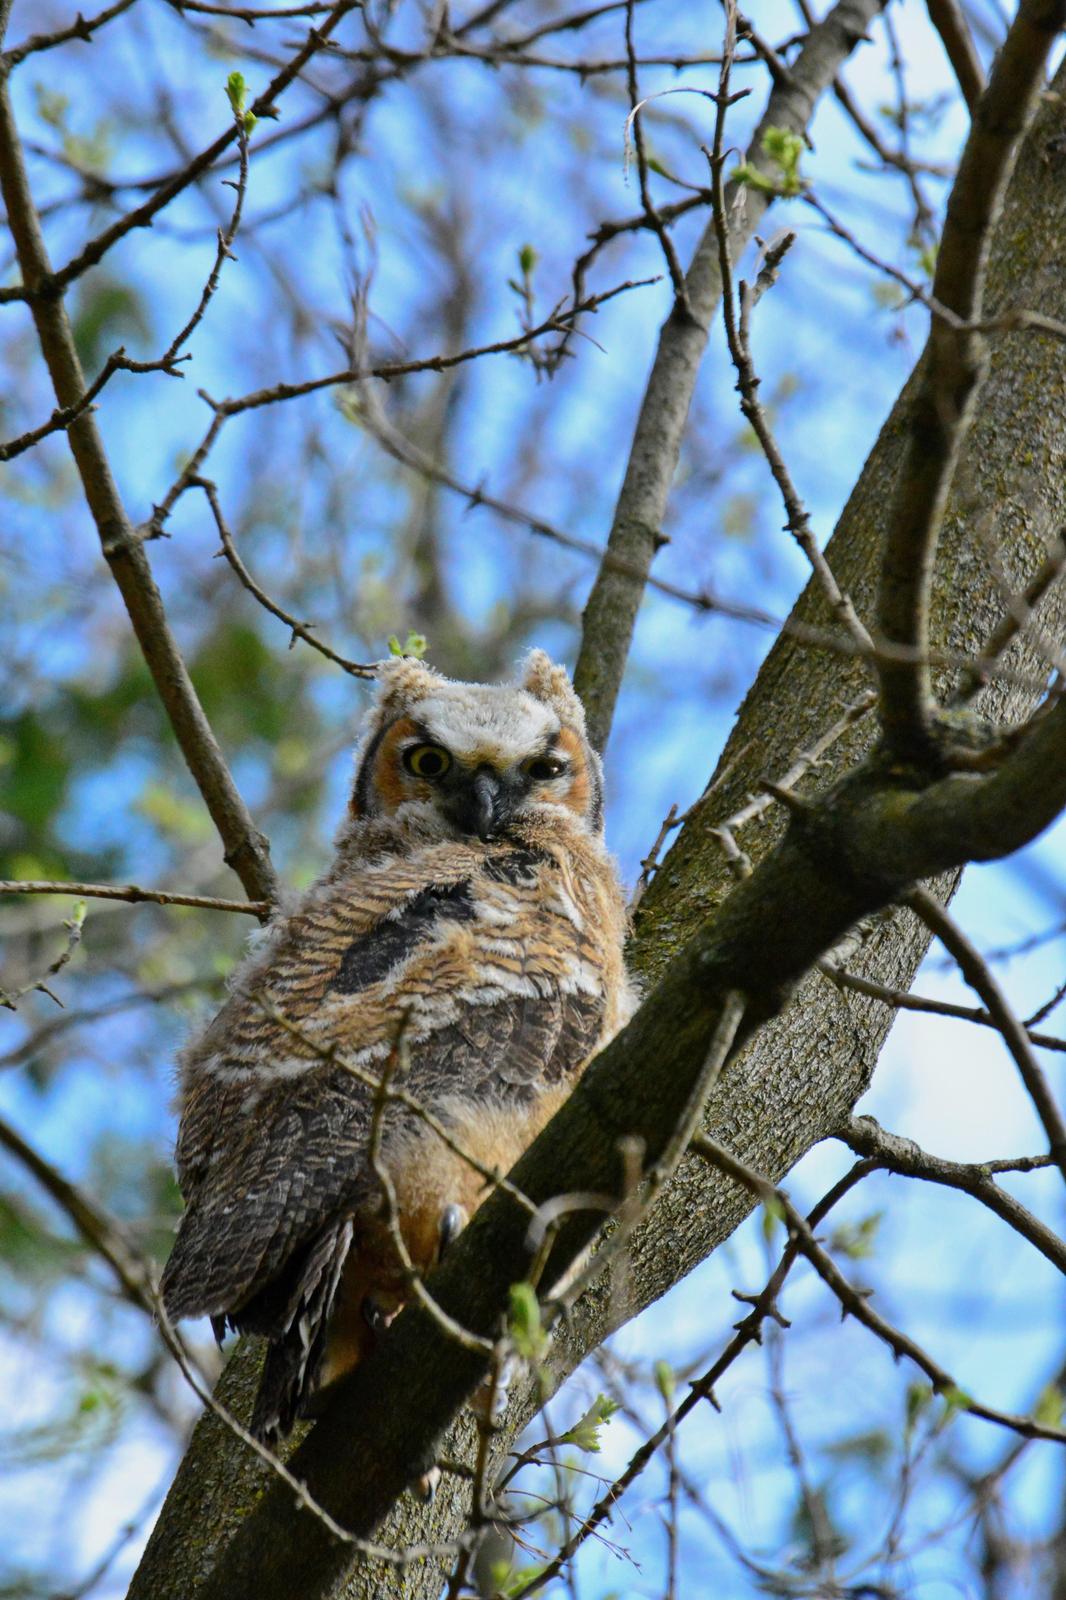 Great Horned Owl (Great Horned) Photo by Linda Cote